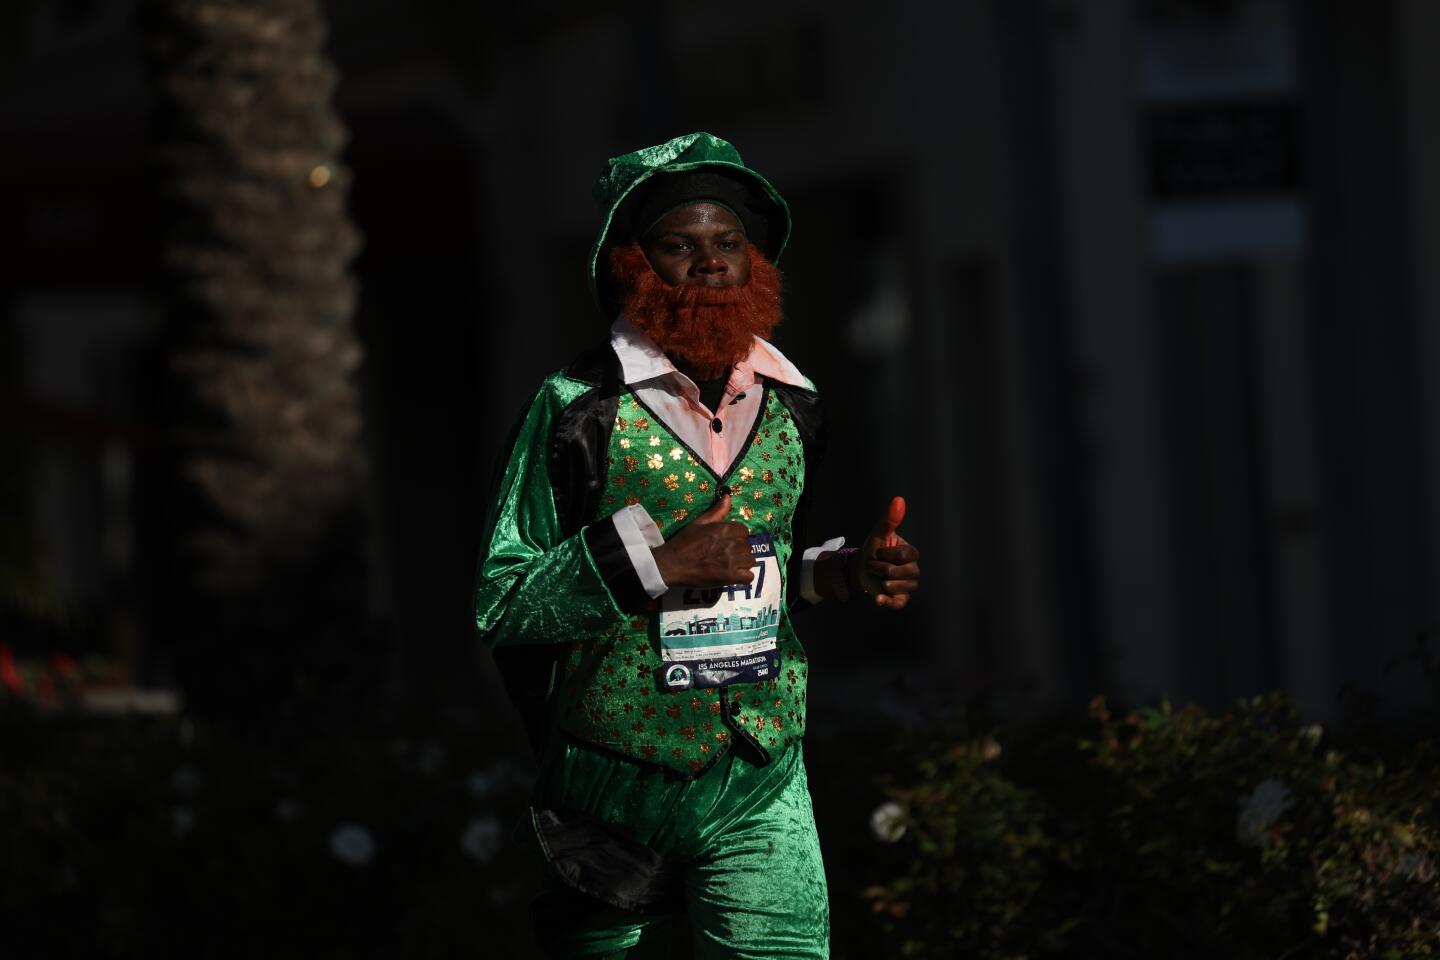 A runner during the 2020 L.A. Marathon on Sunday in Beverly Hills.